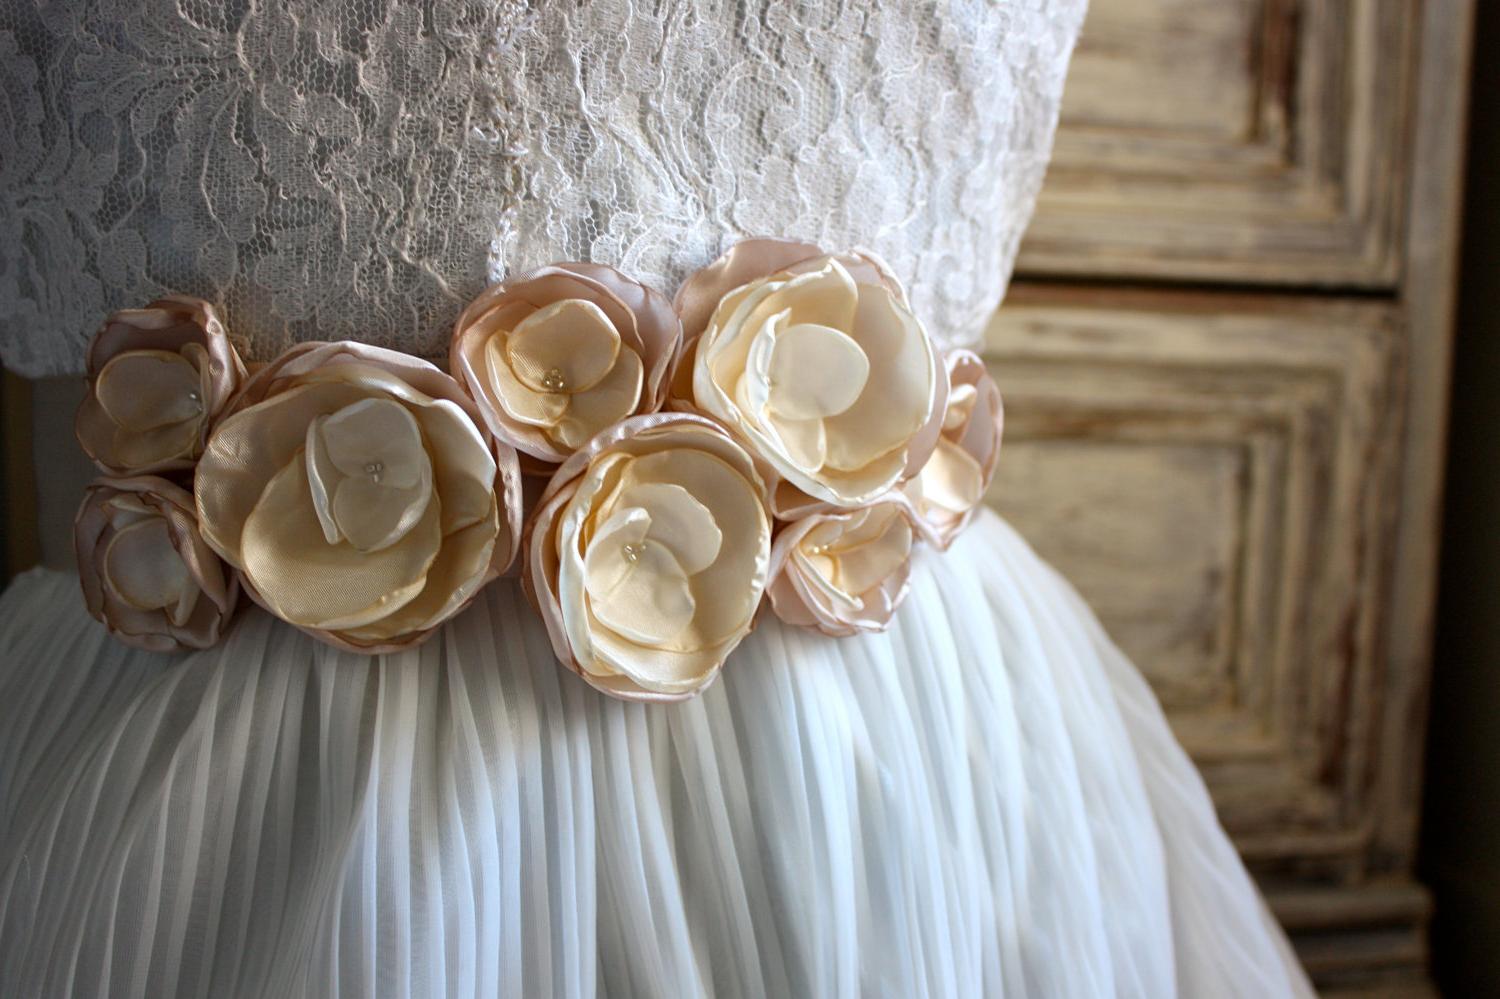 Rose Belt in Caramel Brown, Ivory Brown and Ivory  also shown in Purple Hues